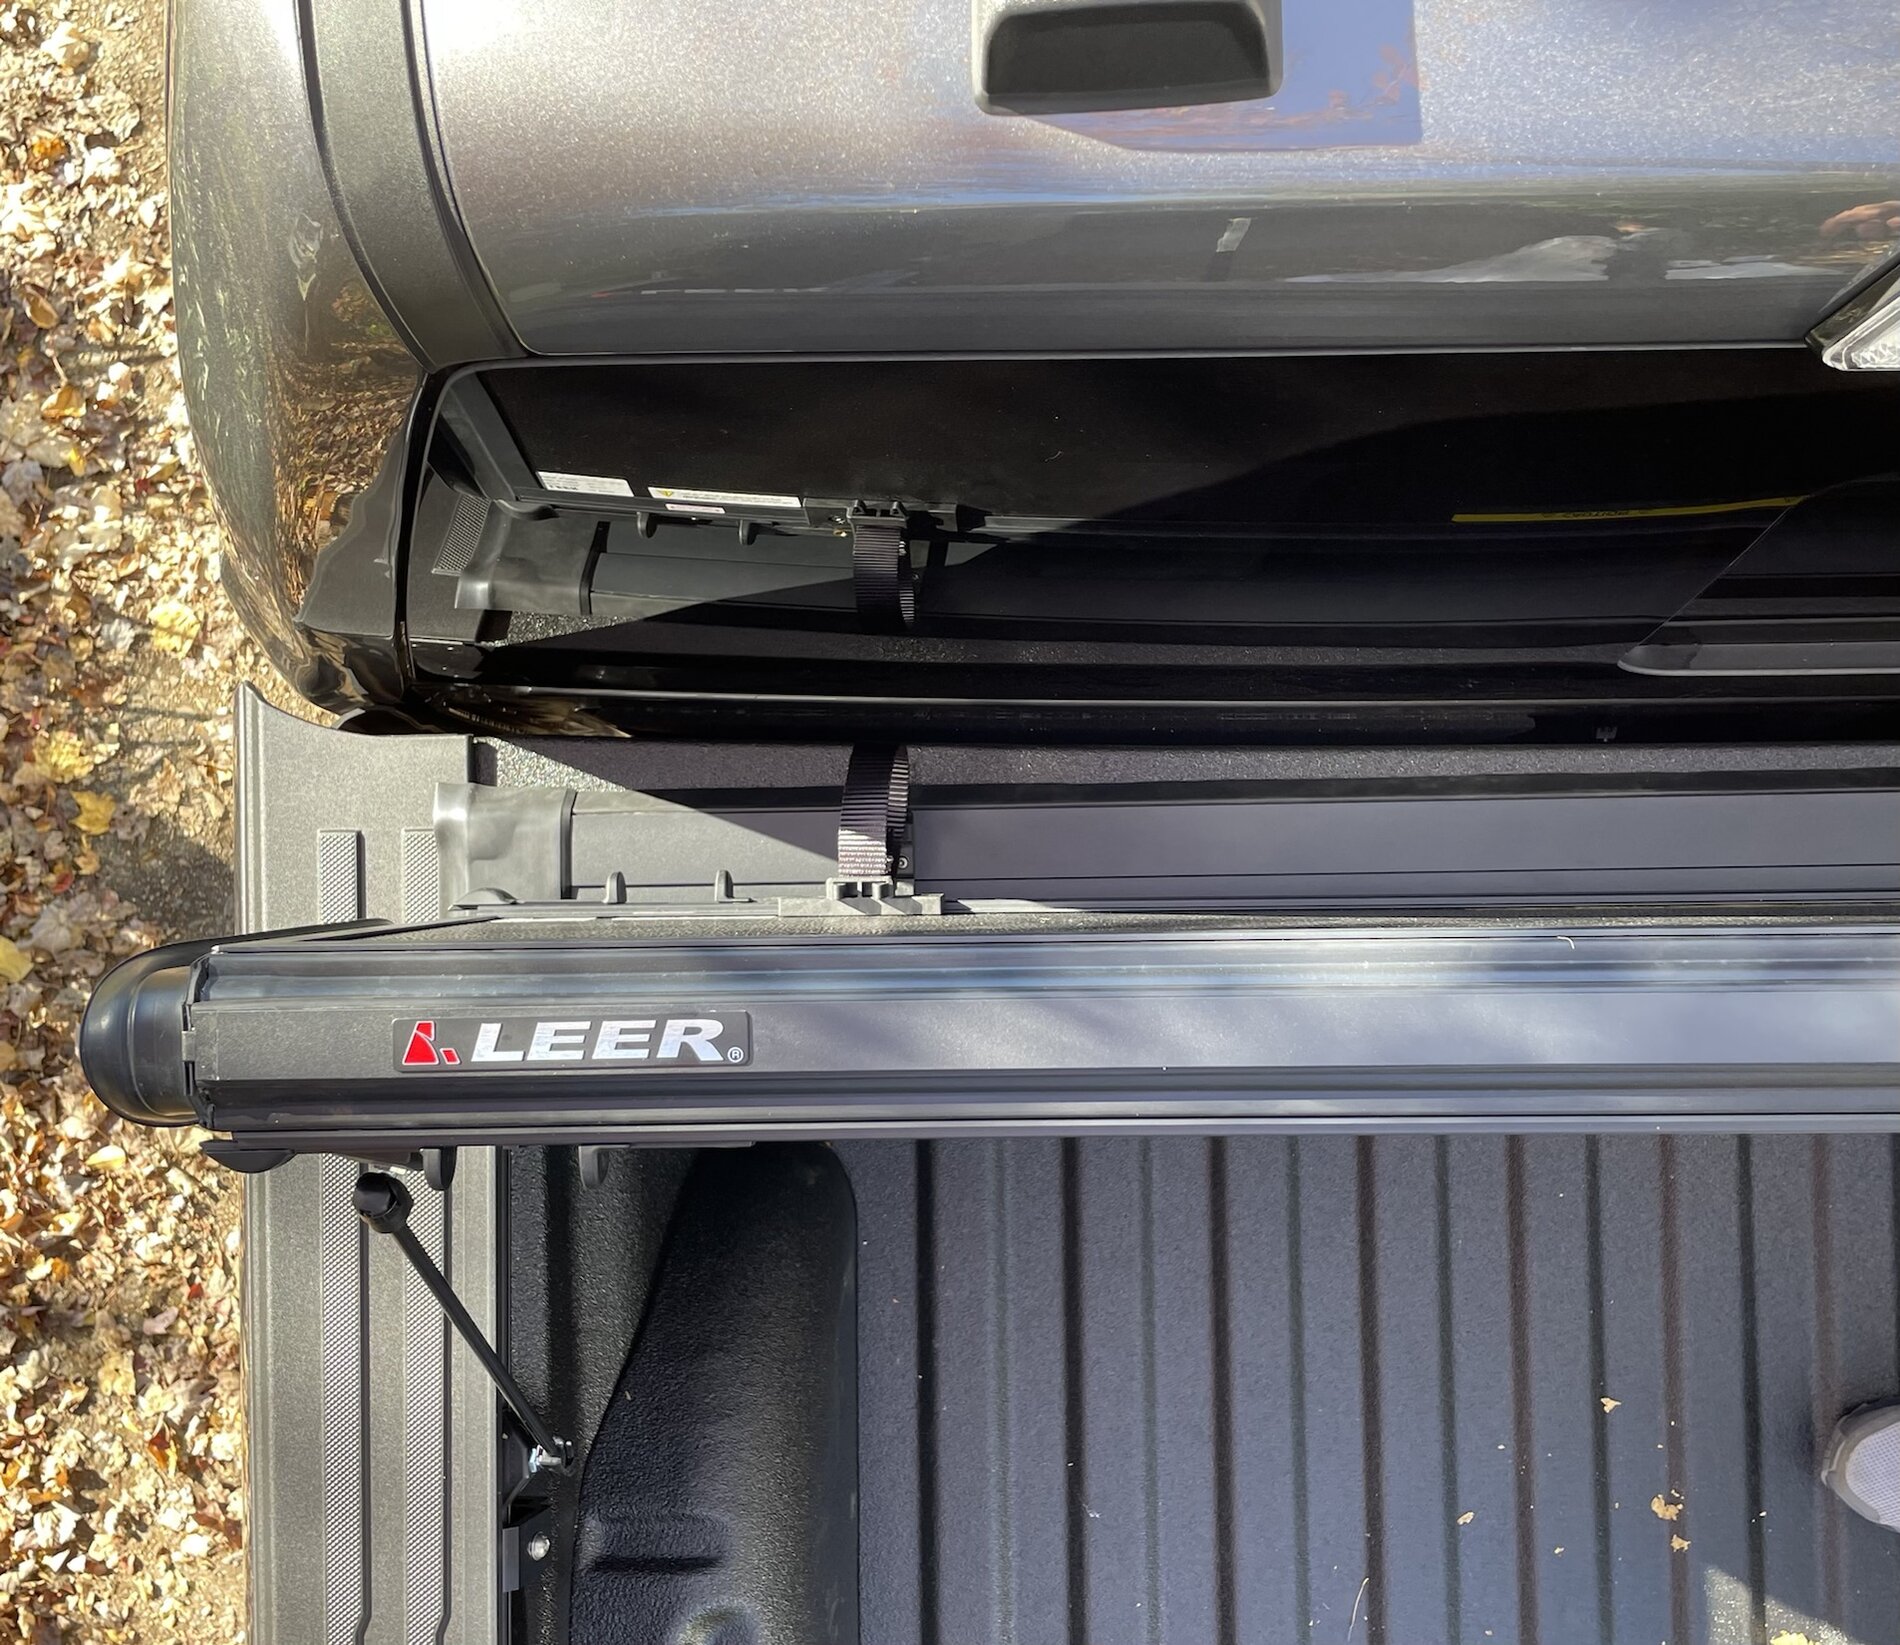 Ford F-150 Lightning Leer HF650M Tonneau Cover Review with Photos! - Install & First Impressions IMG_6472.JPEG